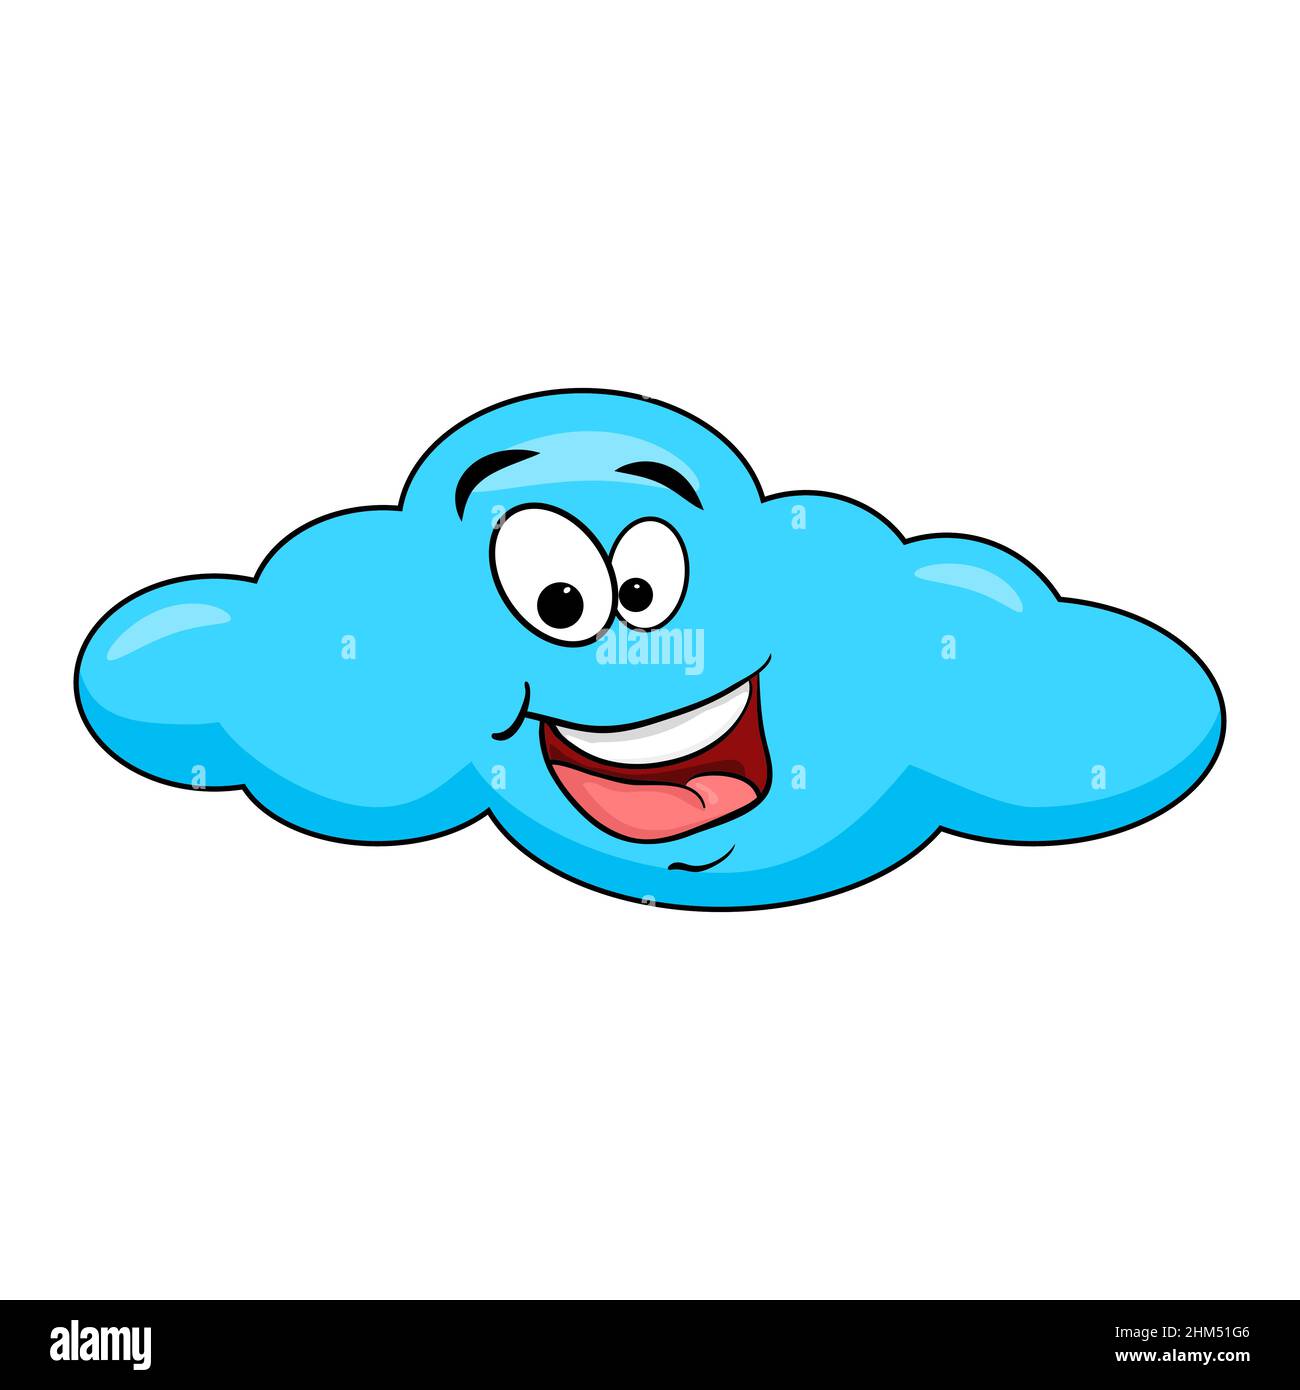 Cute cartoon cloud character with smile and eyes. Vector illustration isolated on white background. Stock Vector